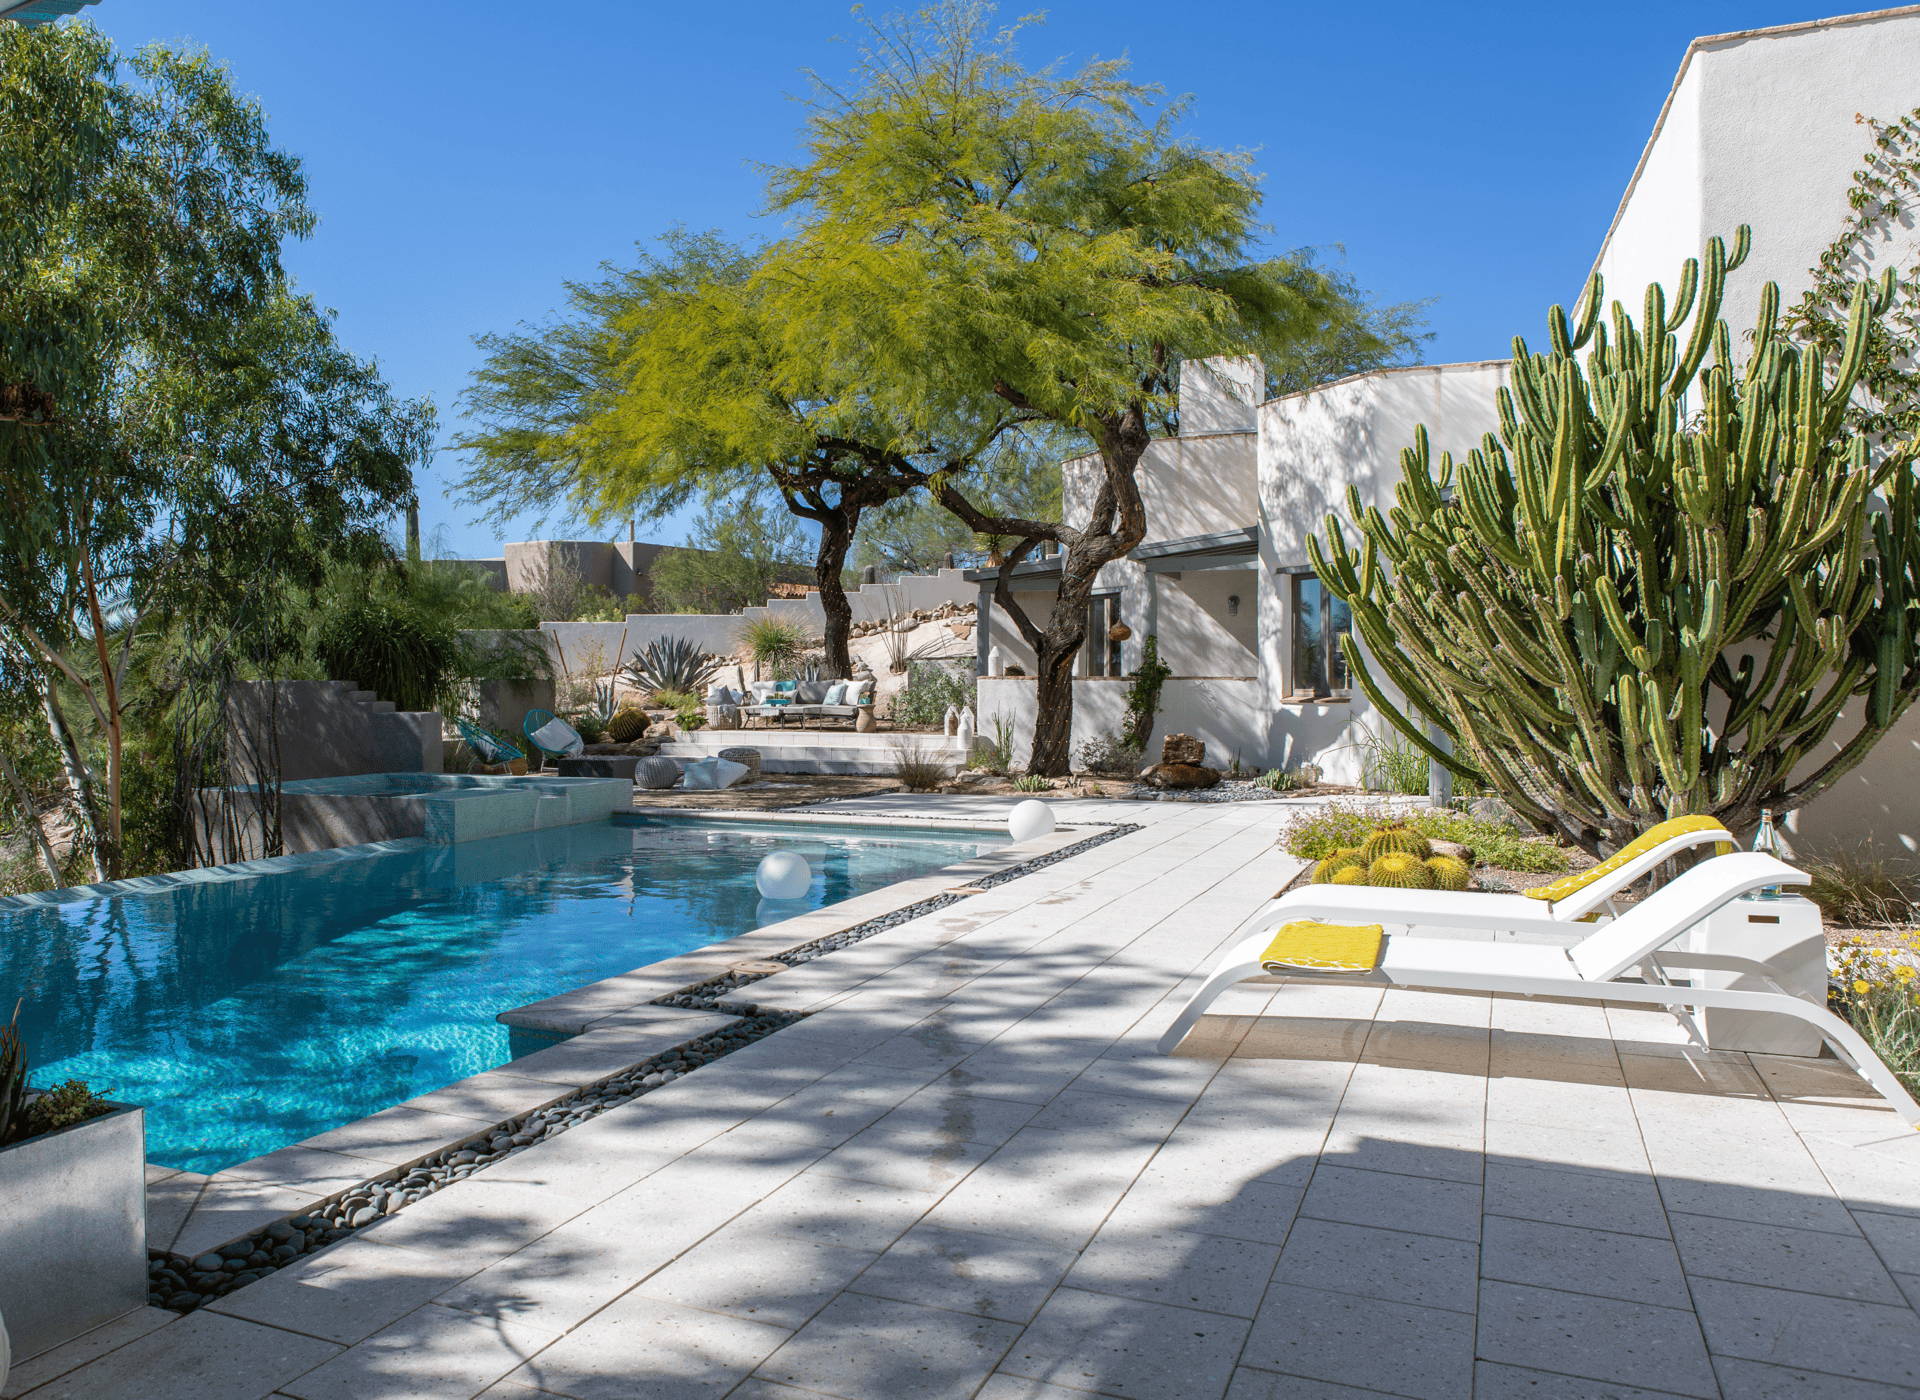 A modern desert patio with white chaise loungers overlooking a pool. 